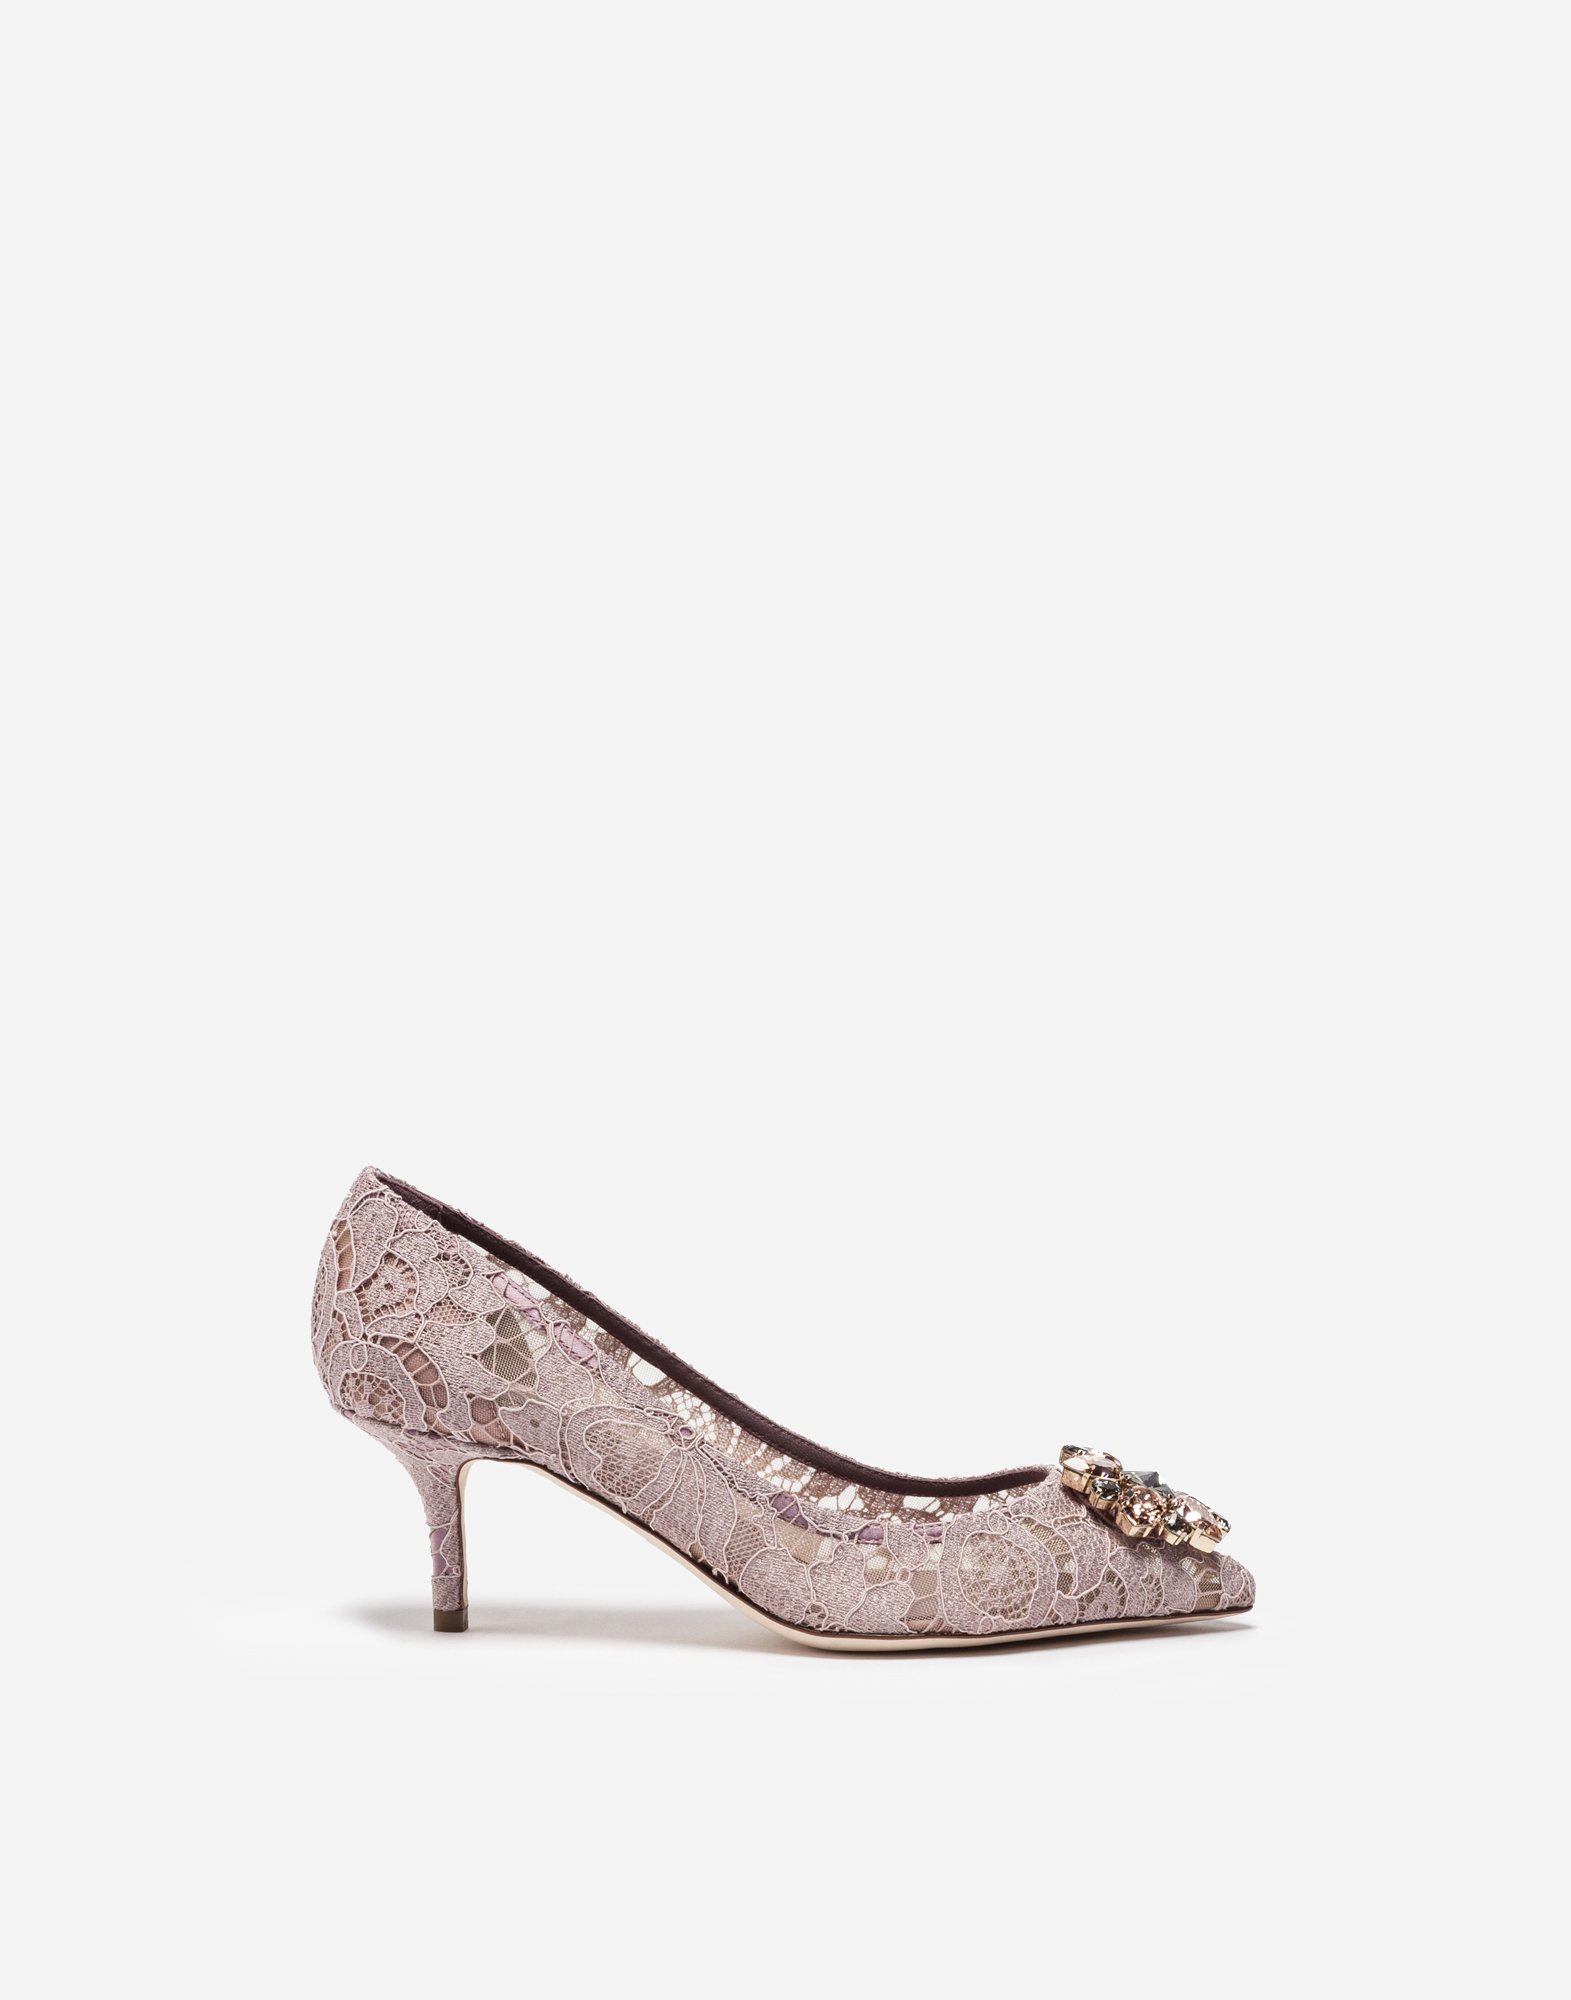 Pump in Taormina lace with crystals in Blush